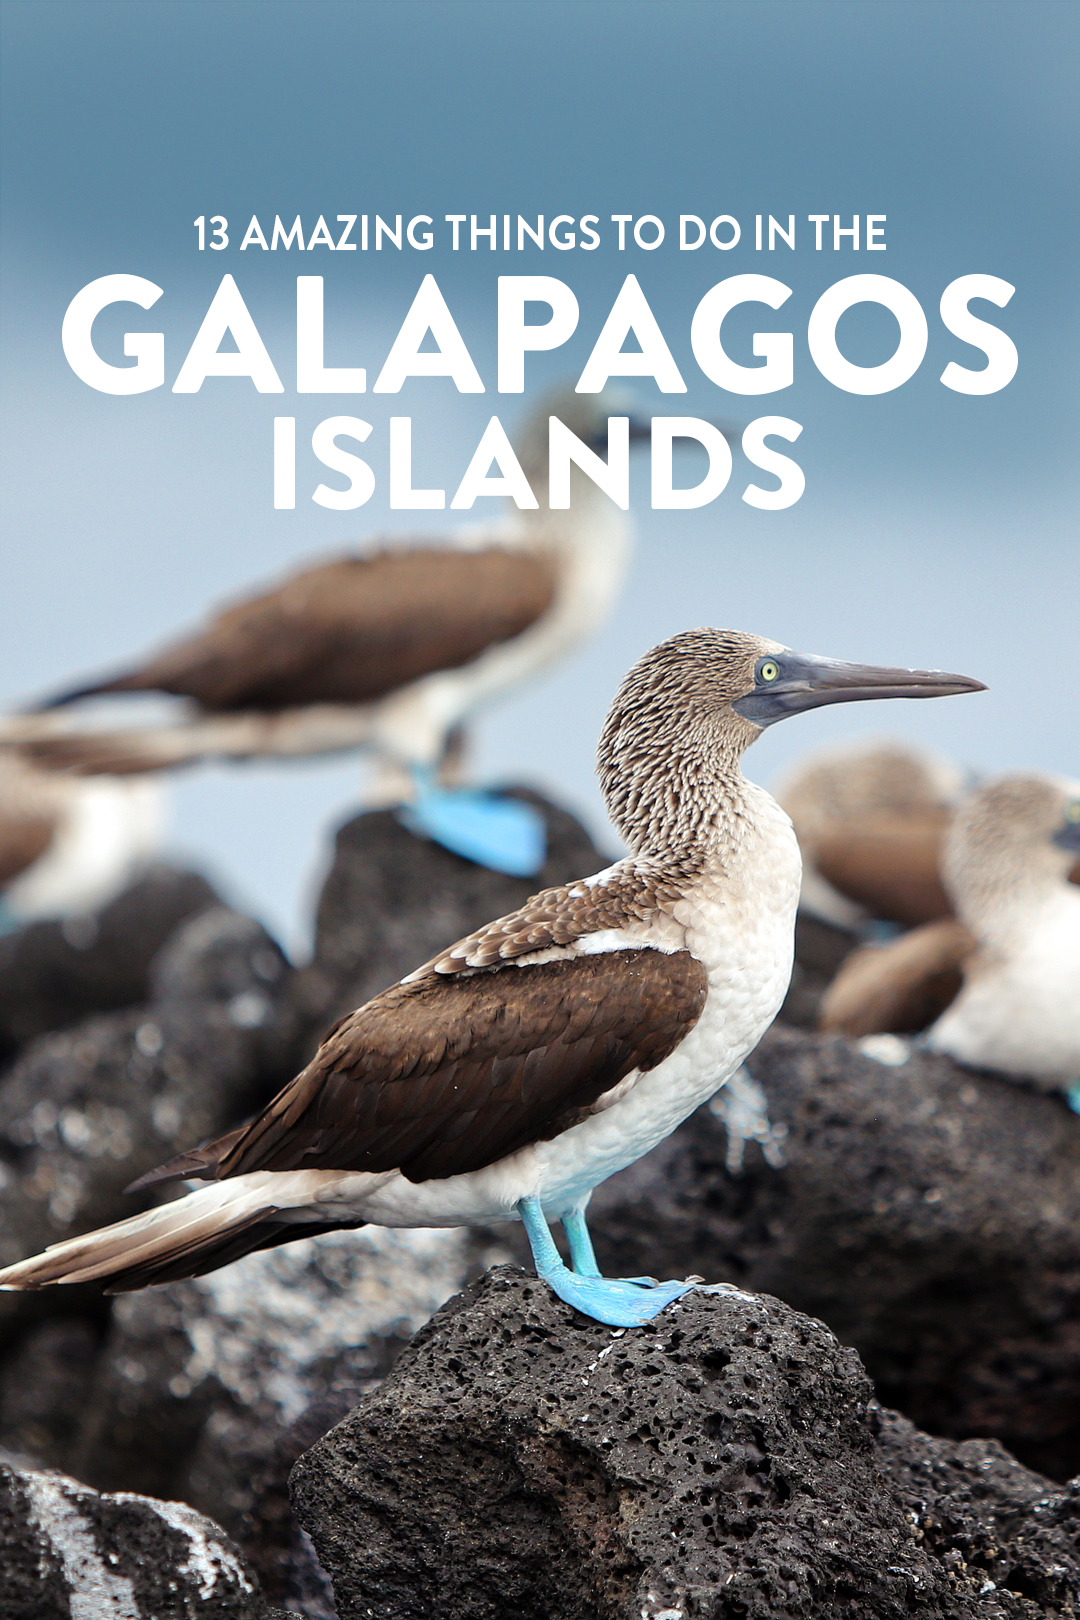 Are you visiting the Galapagos Islands? Save this pin and click through to see more details on the 13 best things to do in Galapagos Islands. This post includes the top Galapagos Islands activities, what to see, best places to see wildlife, and essential tips for your visit, and more // Local Adventurer #galapagosislands #galapagos #ecuador #southamerica